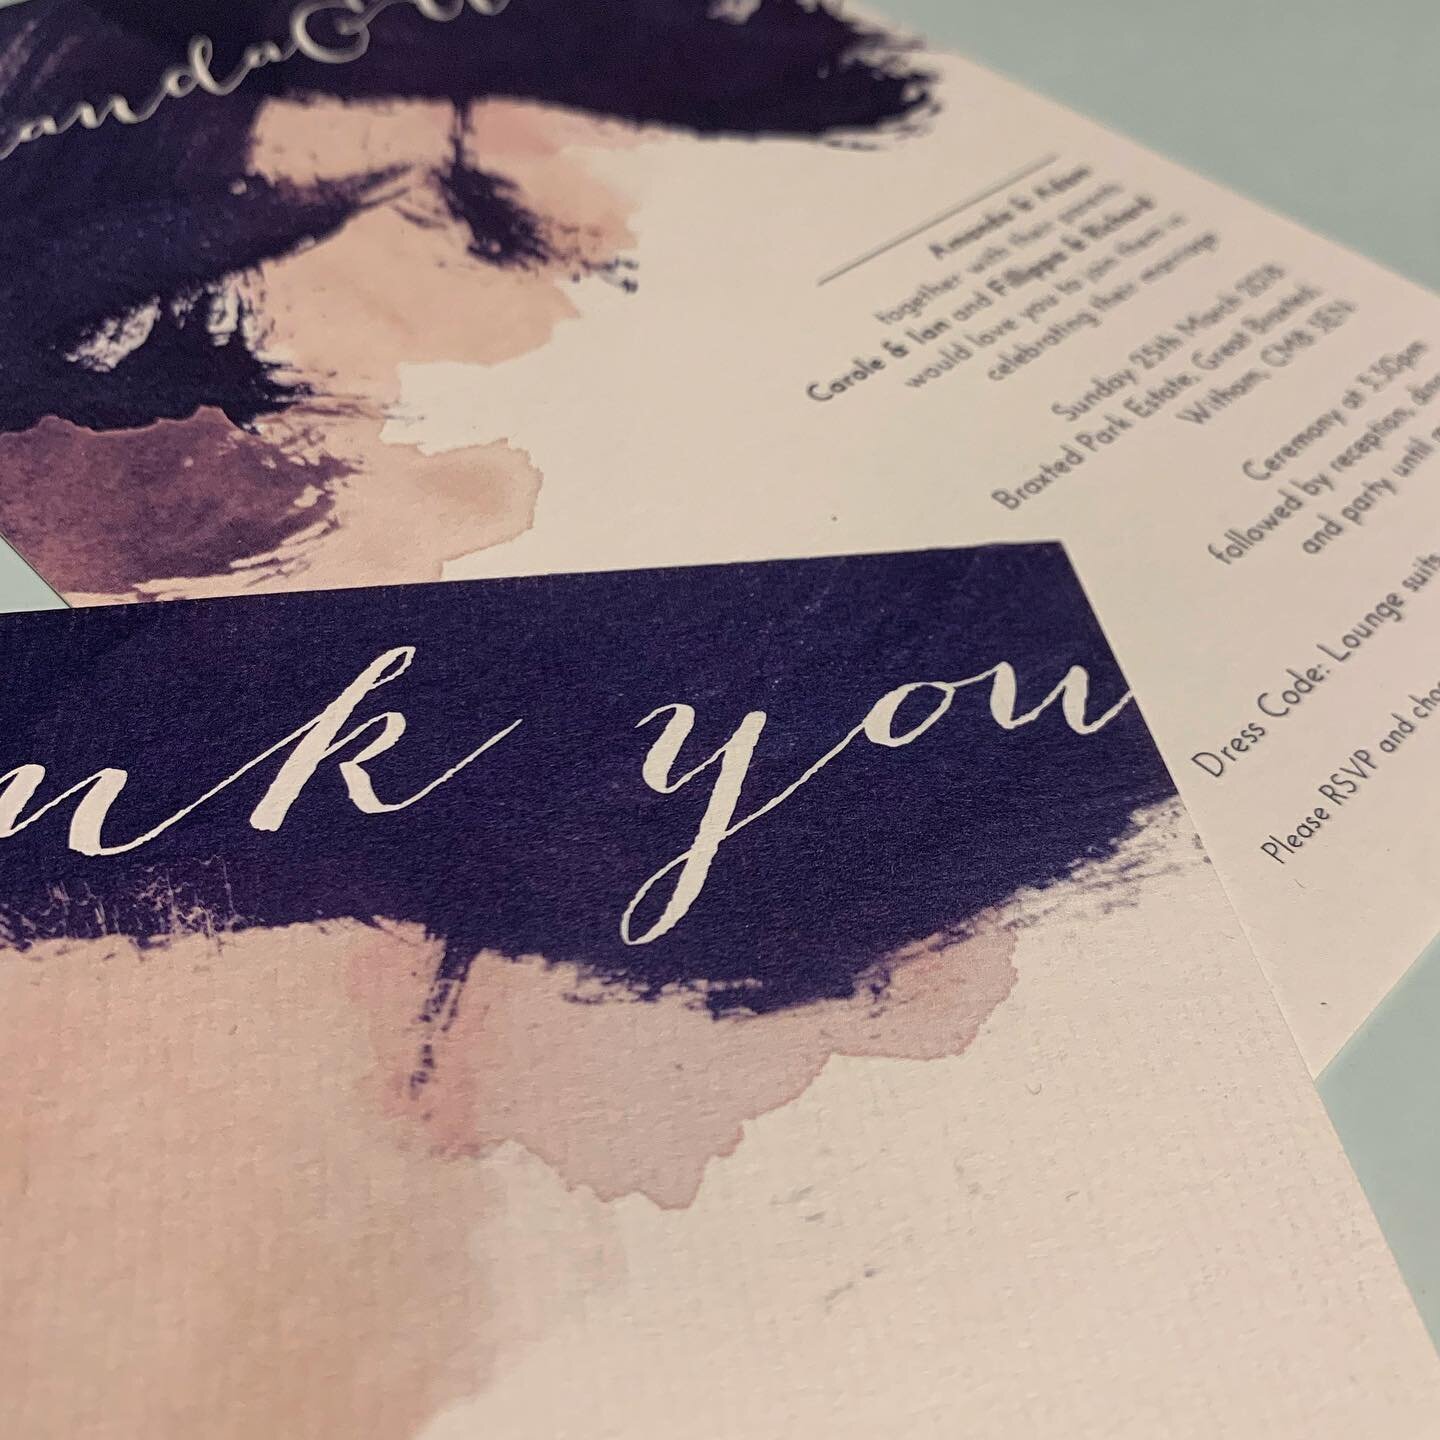 An ink stain combo for your Monday 😍🖋
.
.
.
#livandluc #weddinginspiration #weddingstationery #watercolourstationery #weddinginspo #invitations #invitationdesign #weddingstationeryuk #stationerysuite #thankyoucards #watercolourinvitations